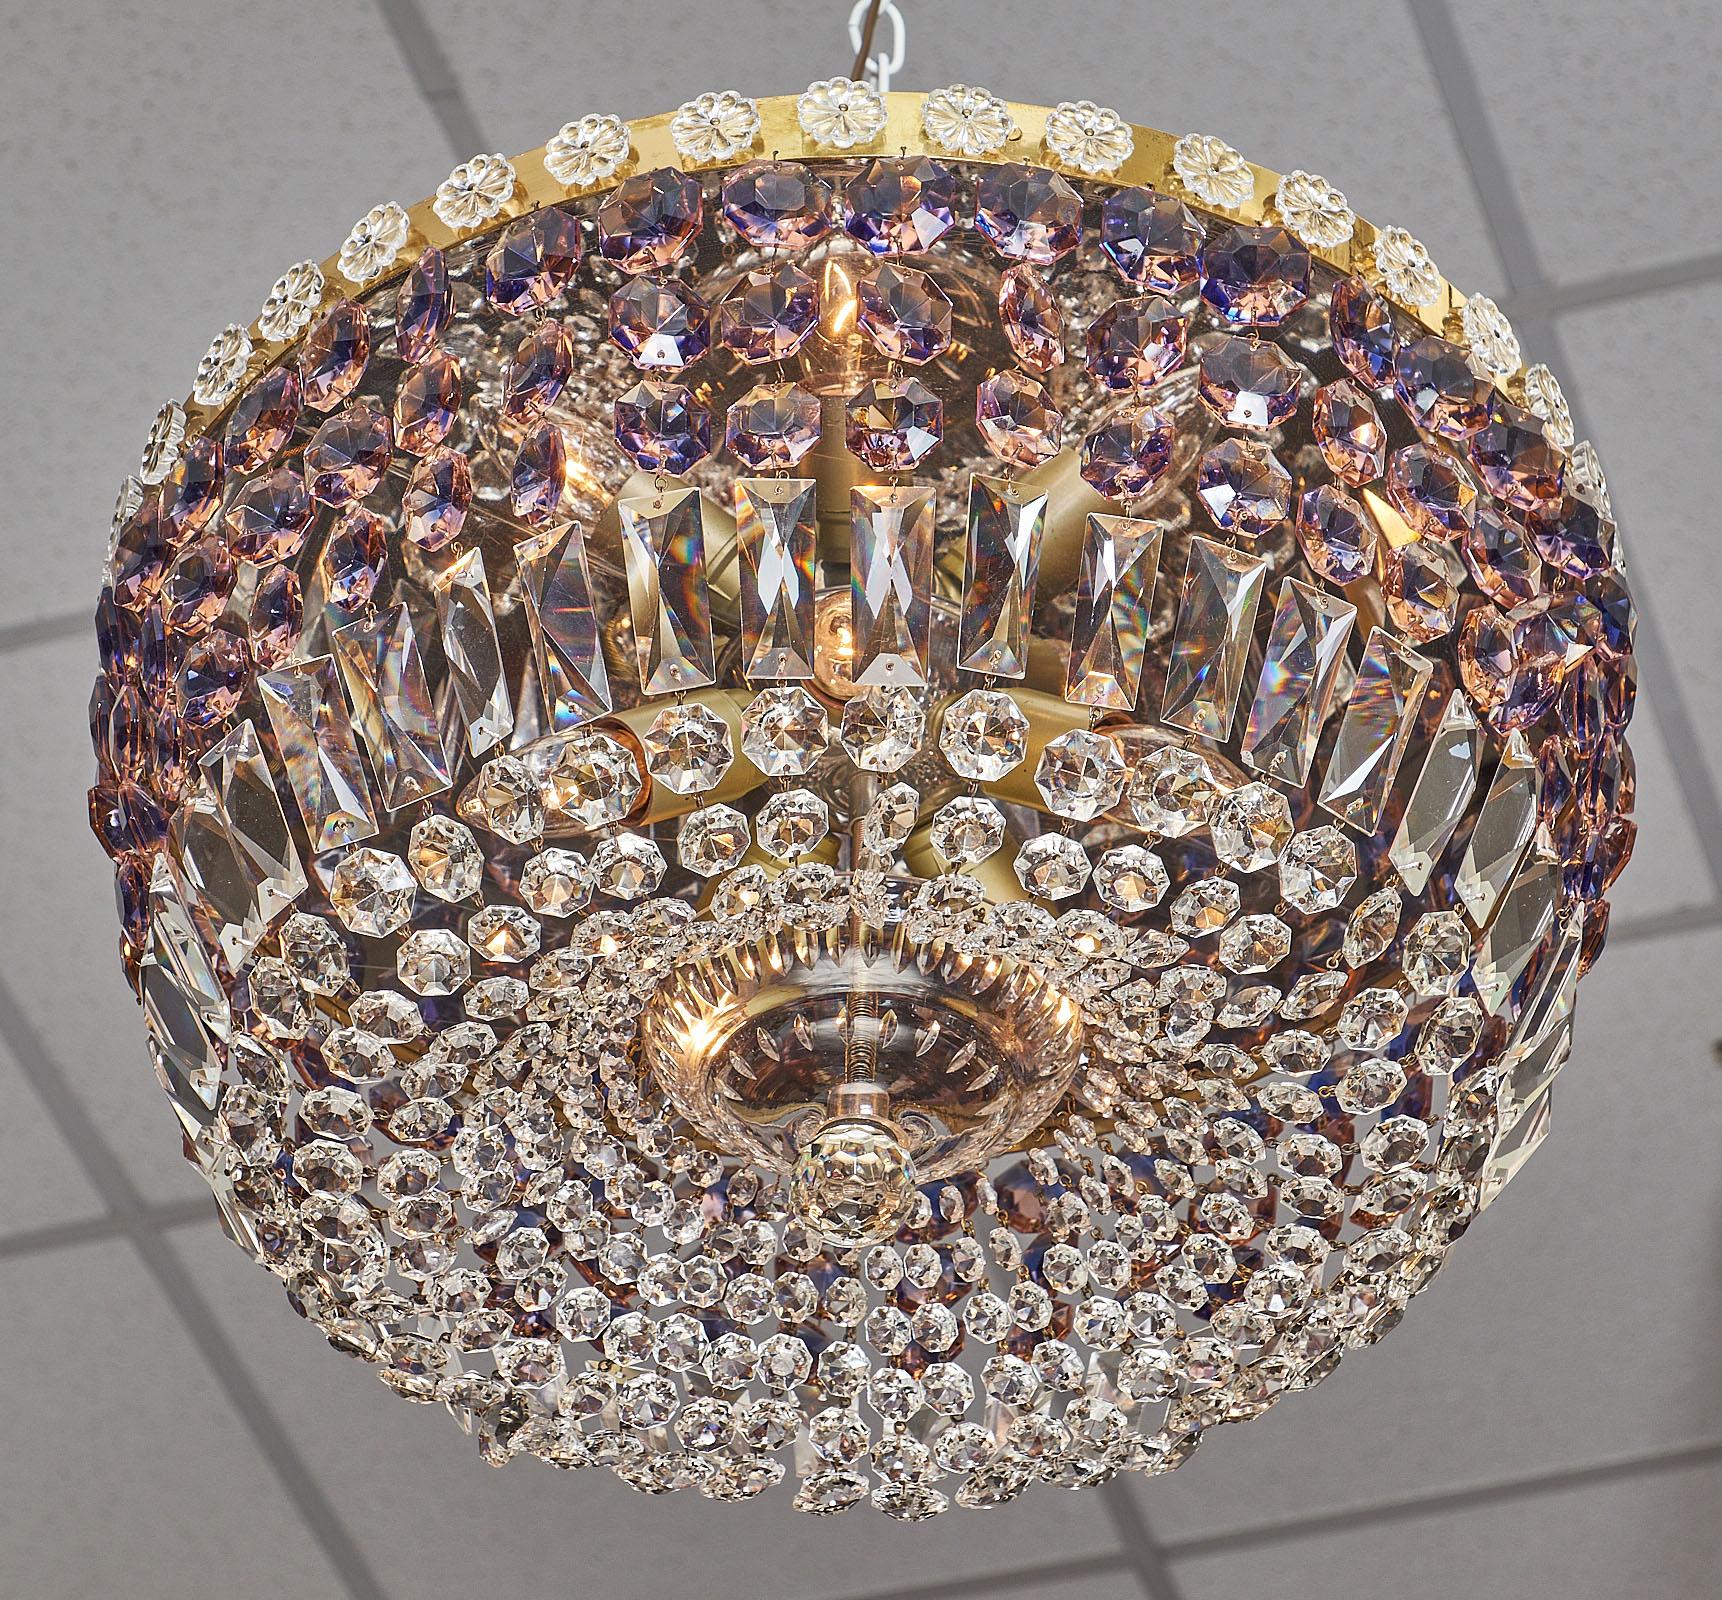 A spectacular French crystal vintage pendant chandelier. This beautiful piece has a brass structure with lovely clear and amethyst cut crystal strands. A crystal finial completes the piece. It has been newly wired to fit US standards.